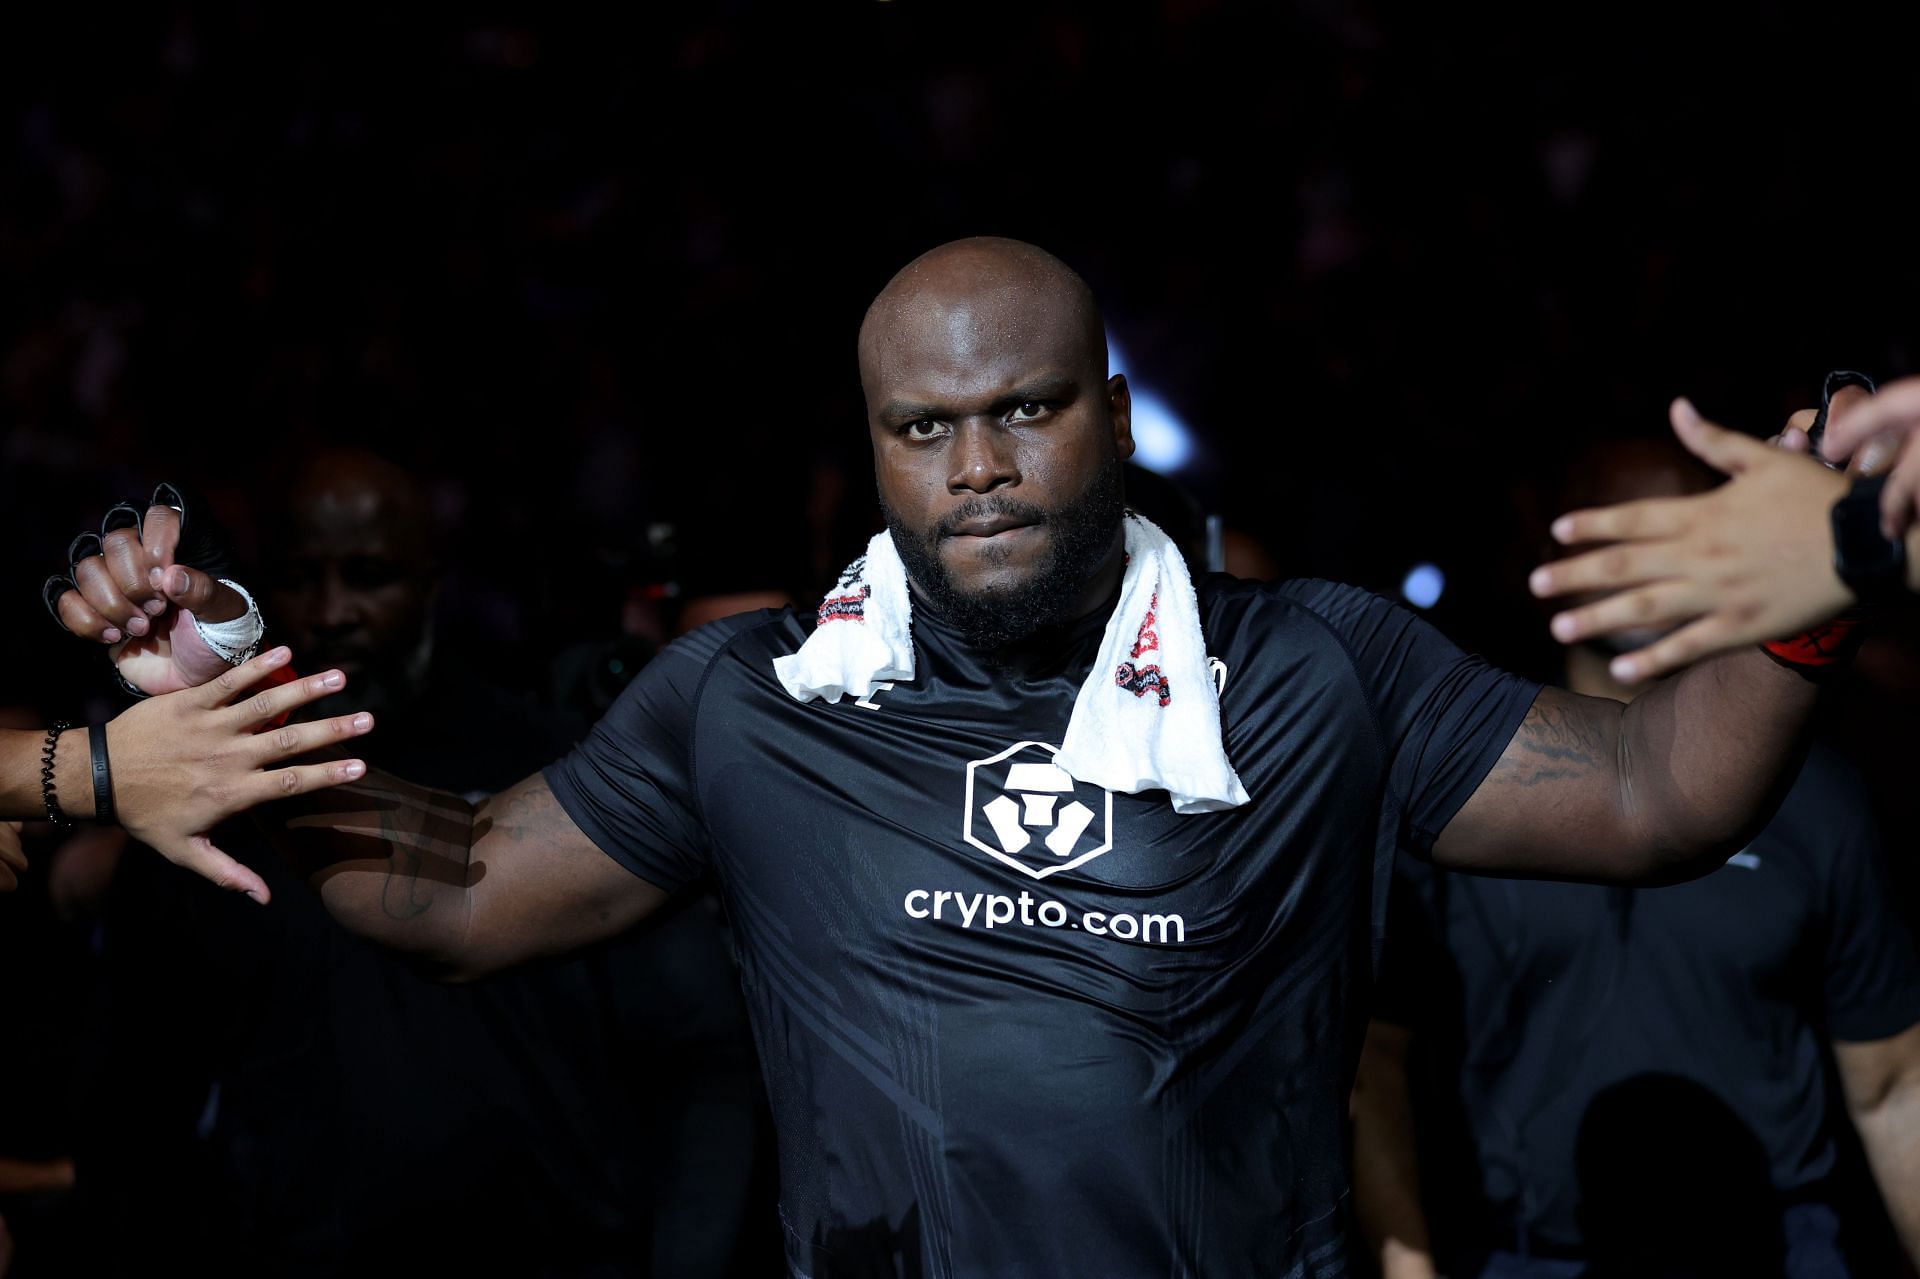 Derrick Lewis could be a beatable opponent for Jon Jones at heavyweight